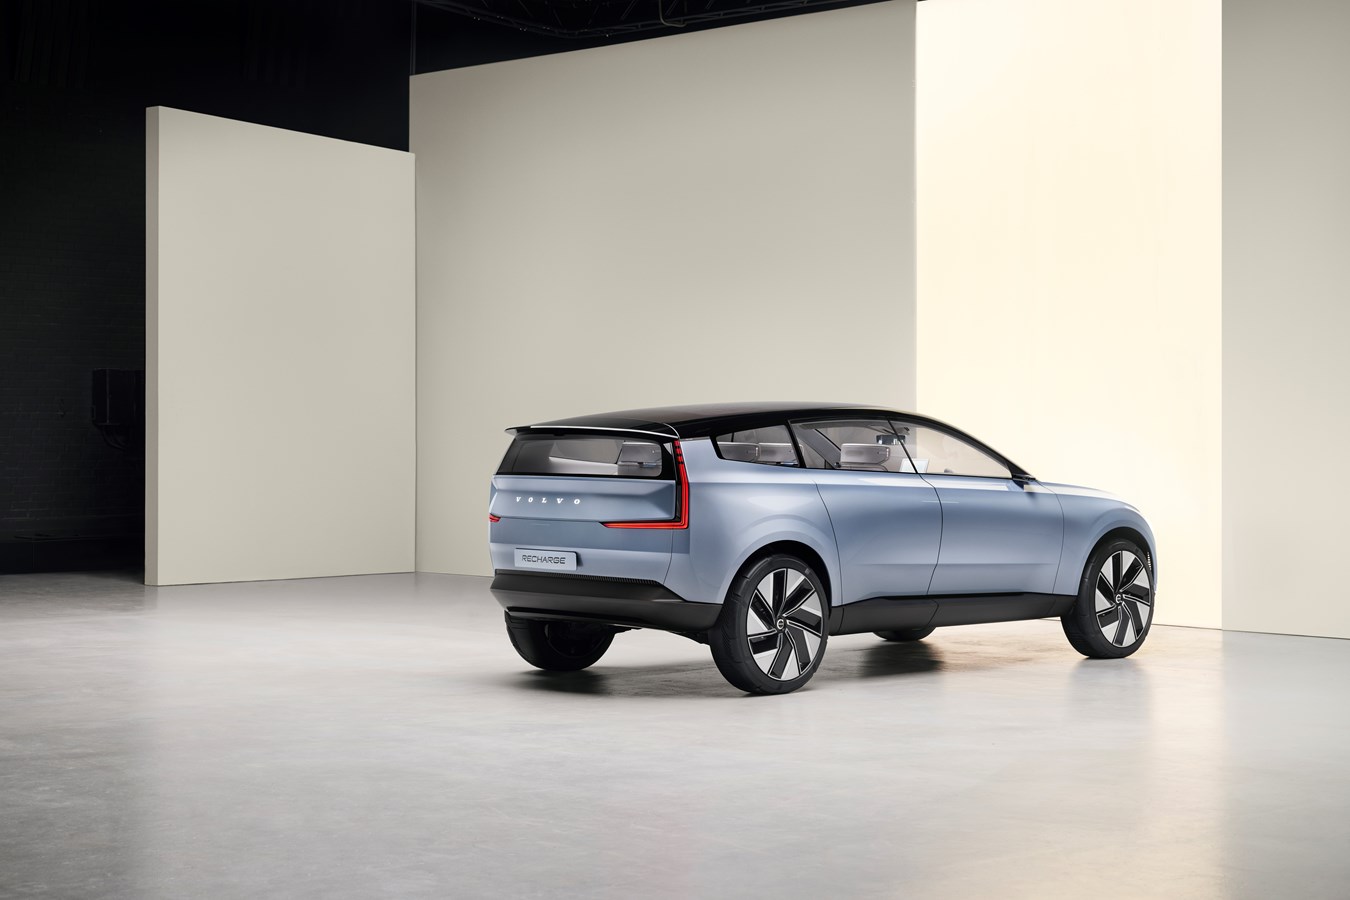 Volvo Concept Recharge, Exterior right side/rear